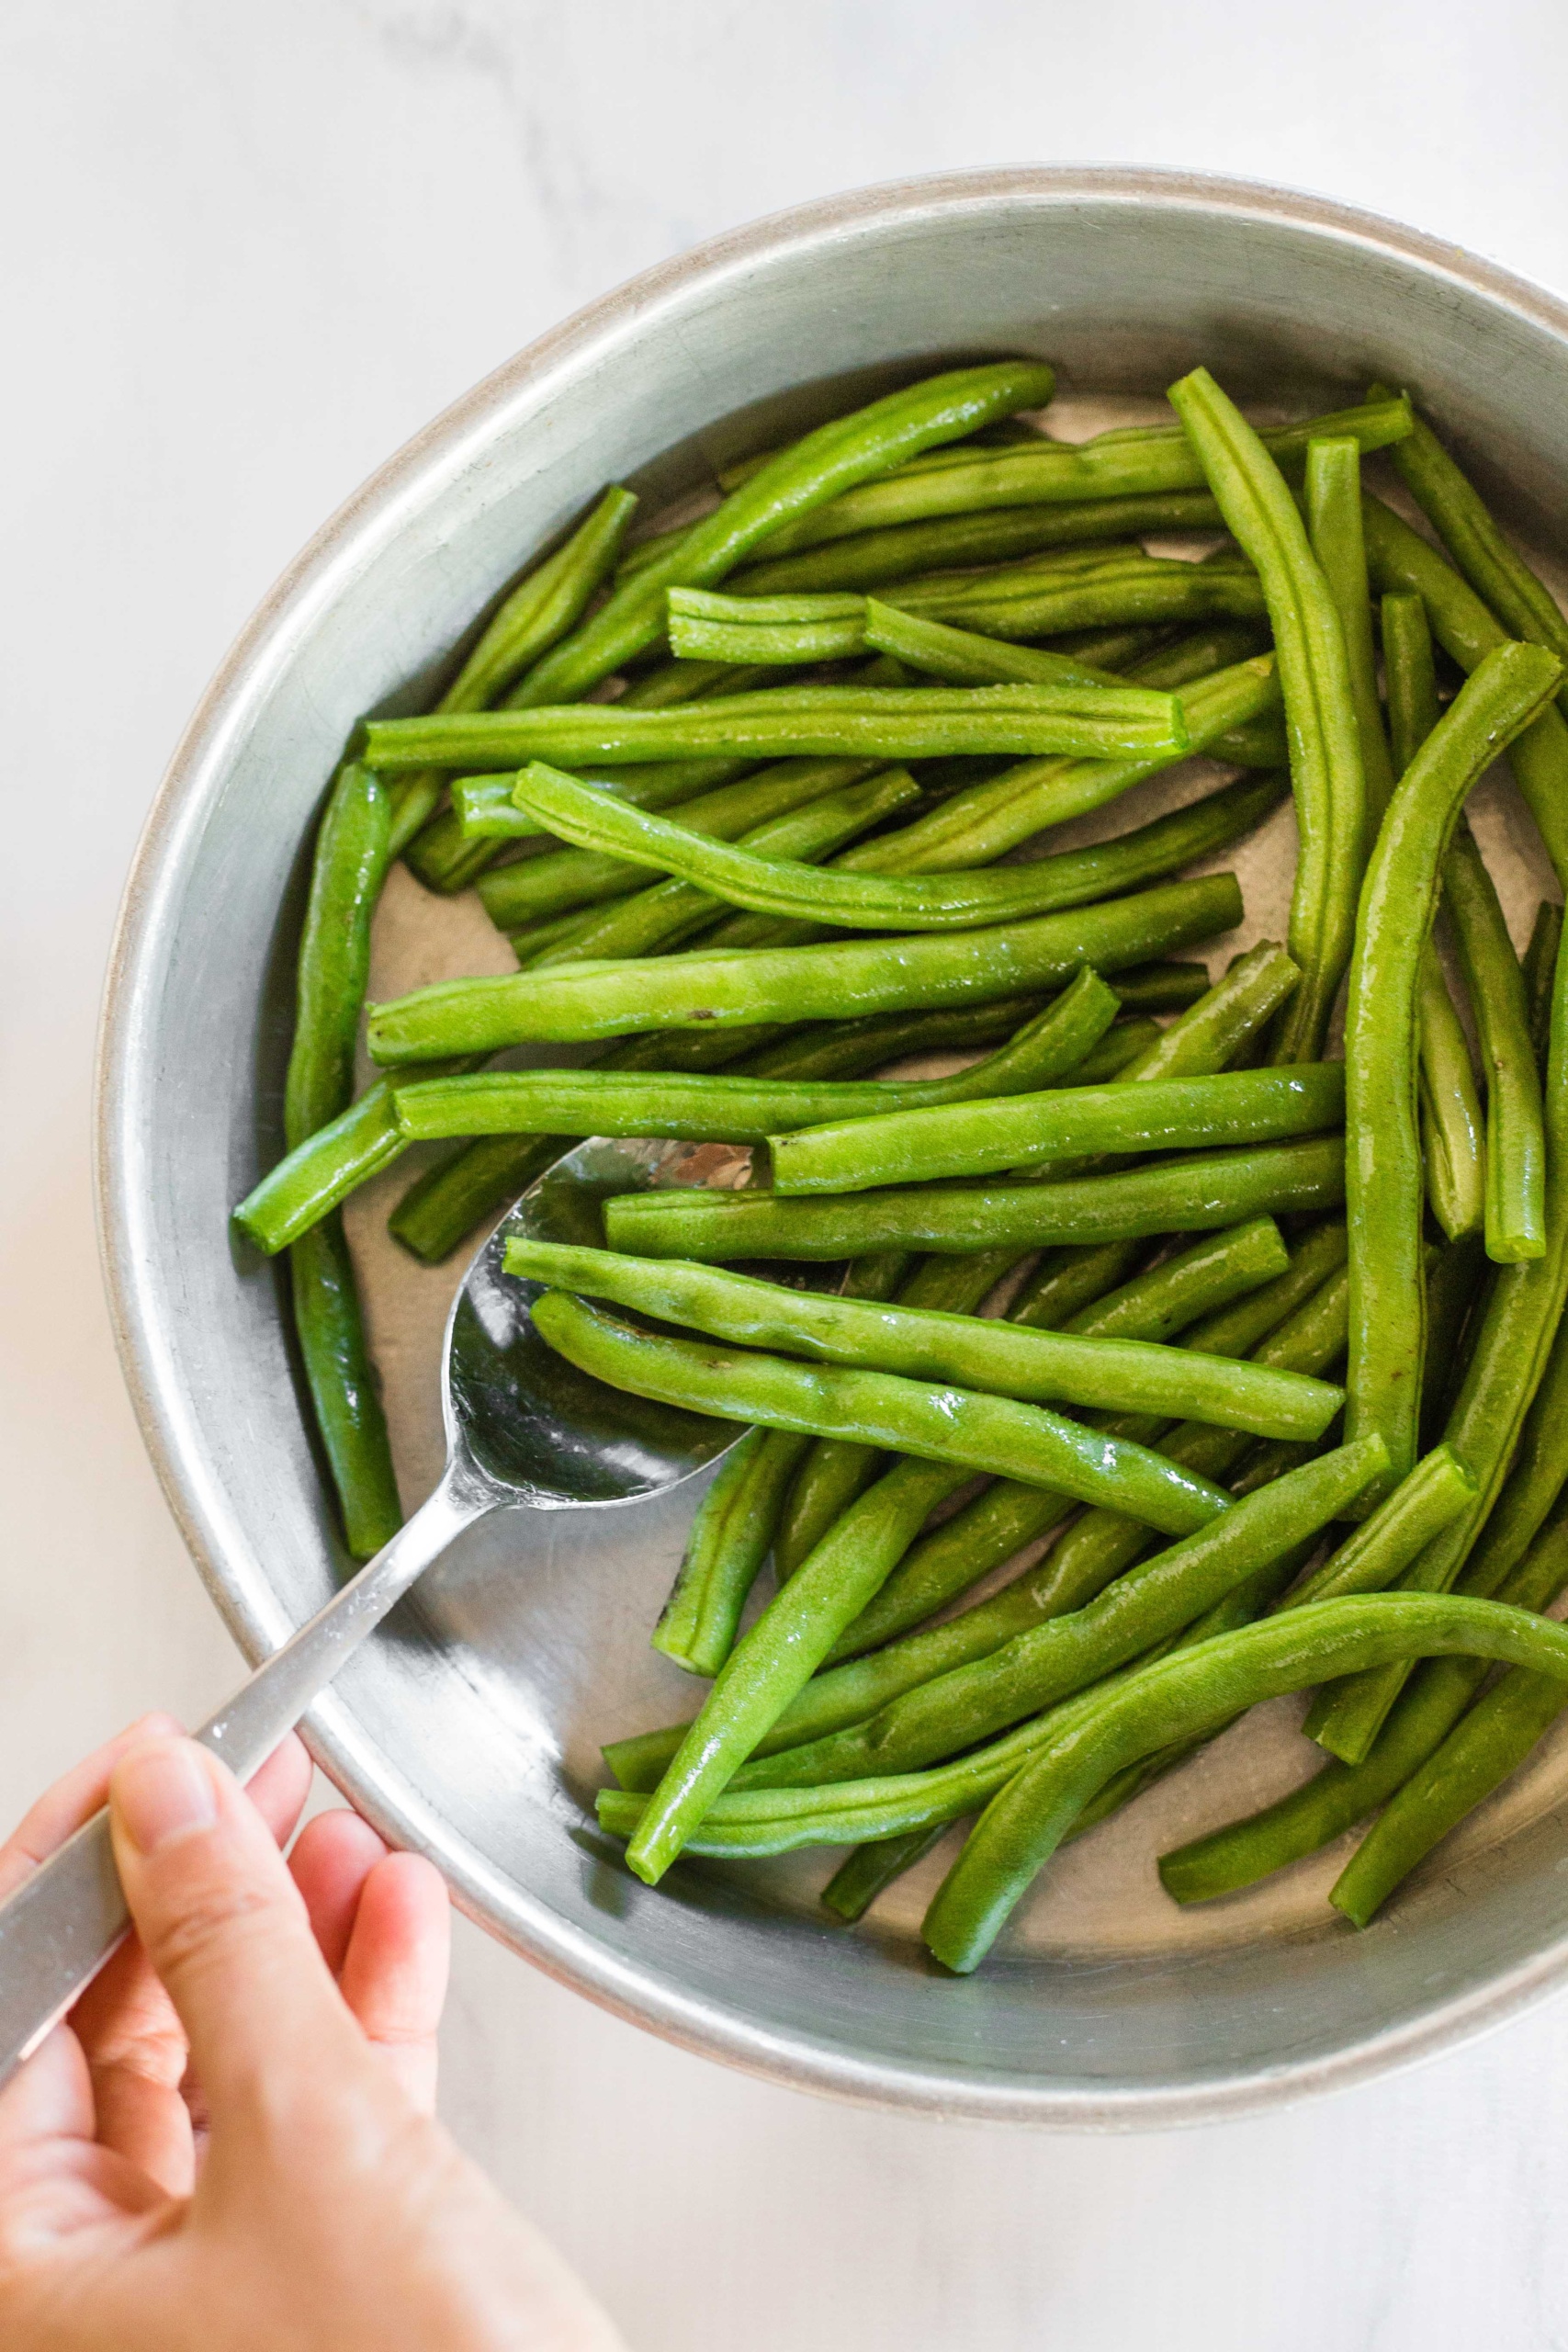 Tossing green beans with oil in a metal bowl.